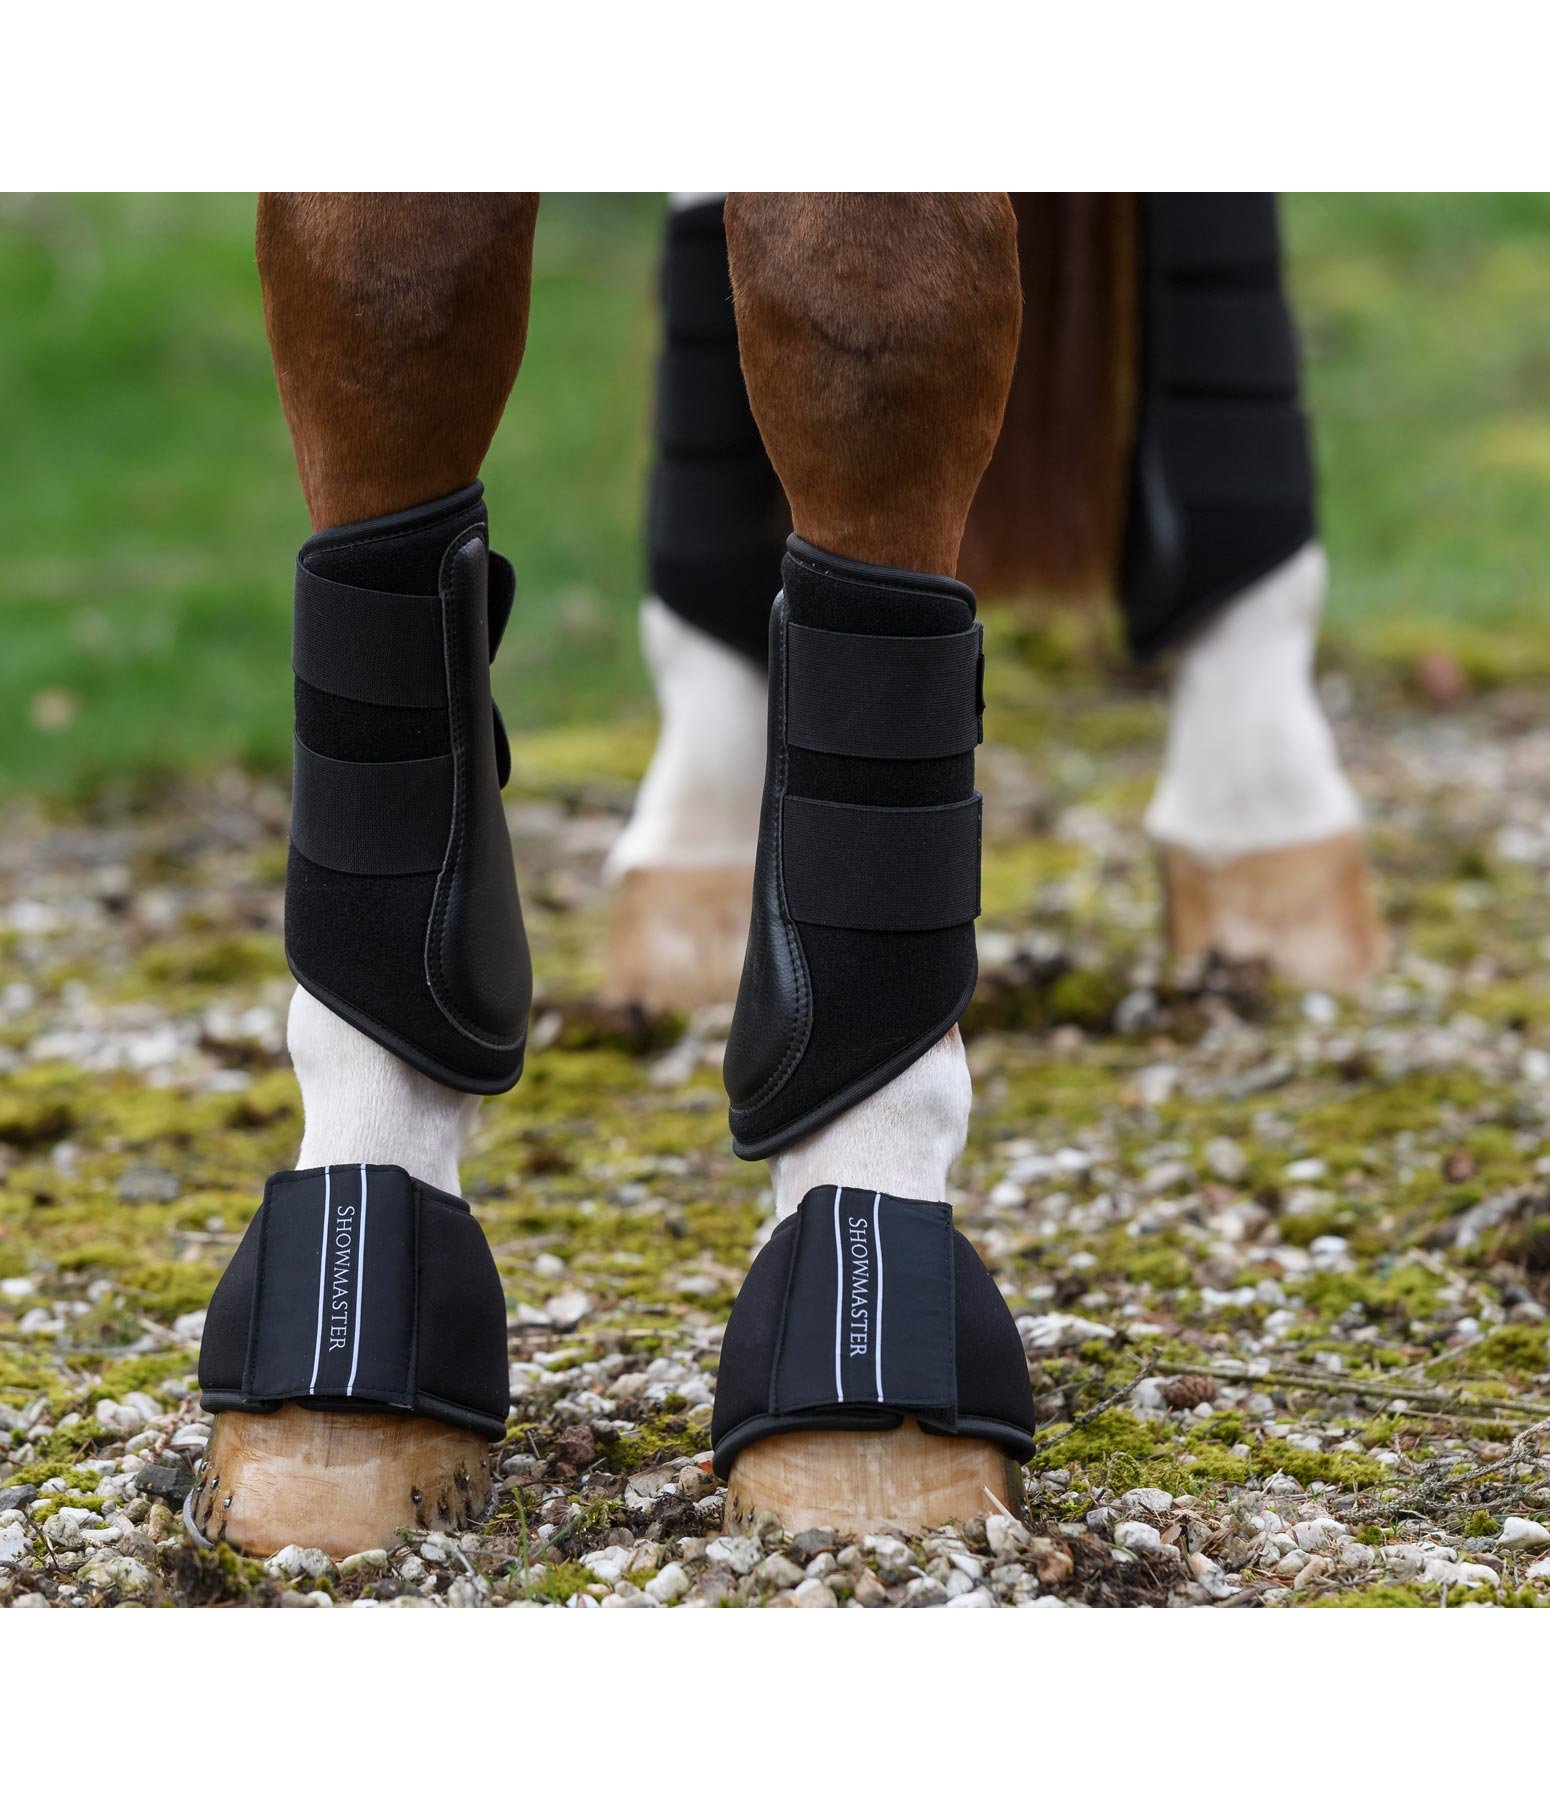 Horse exercise boots